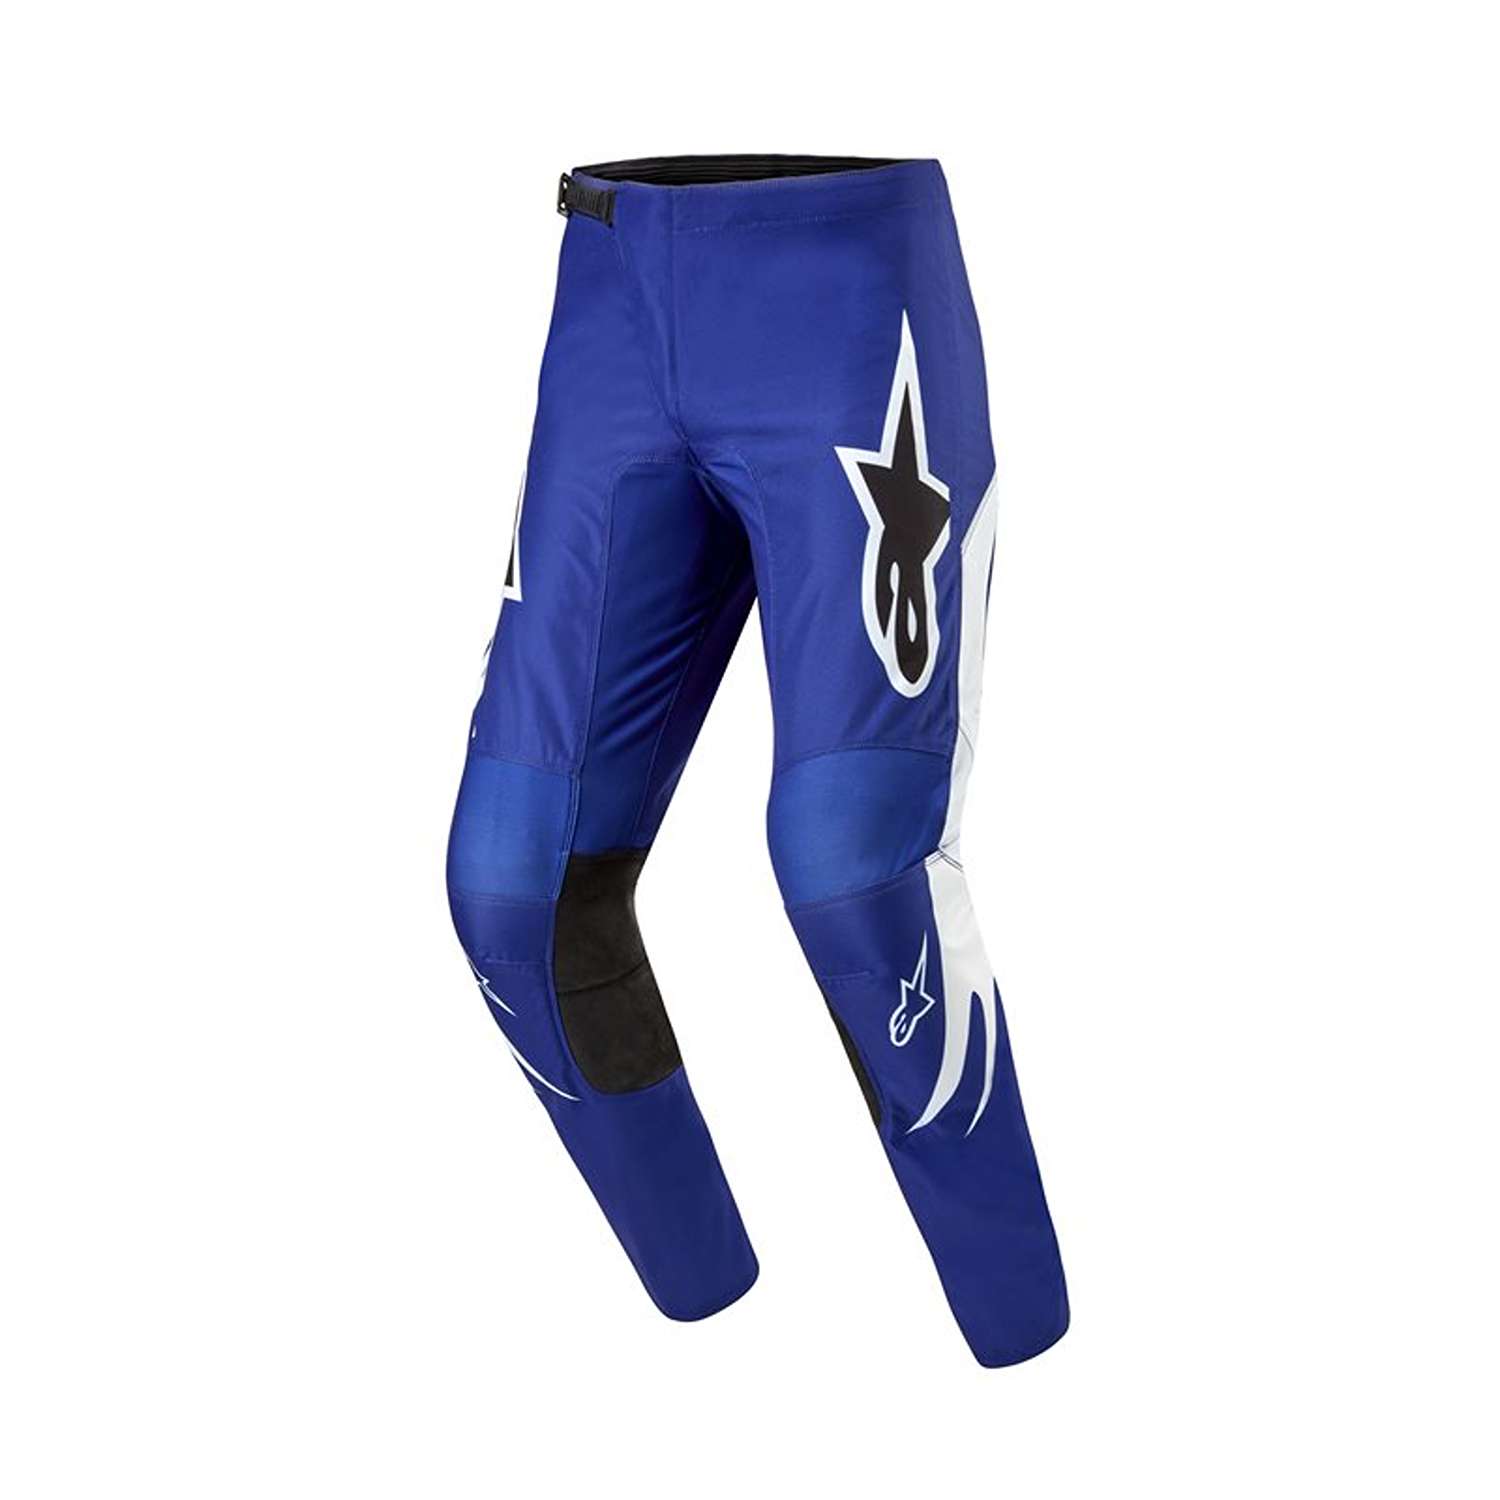 Image of EU Alpinestars Fluid Lucent Pants Blue Ray White Taille 36